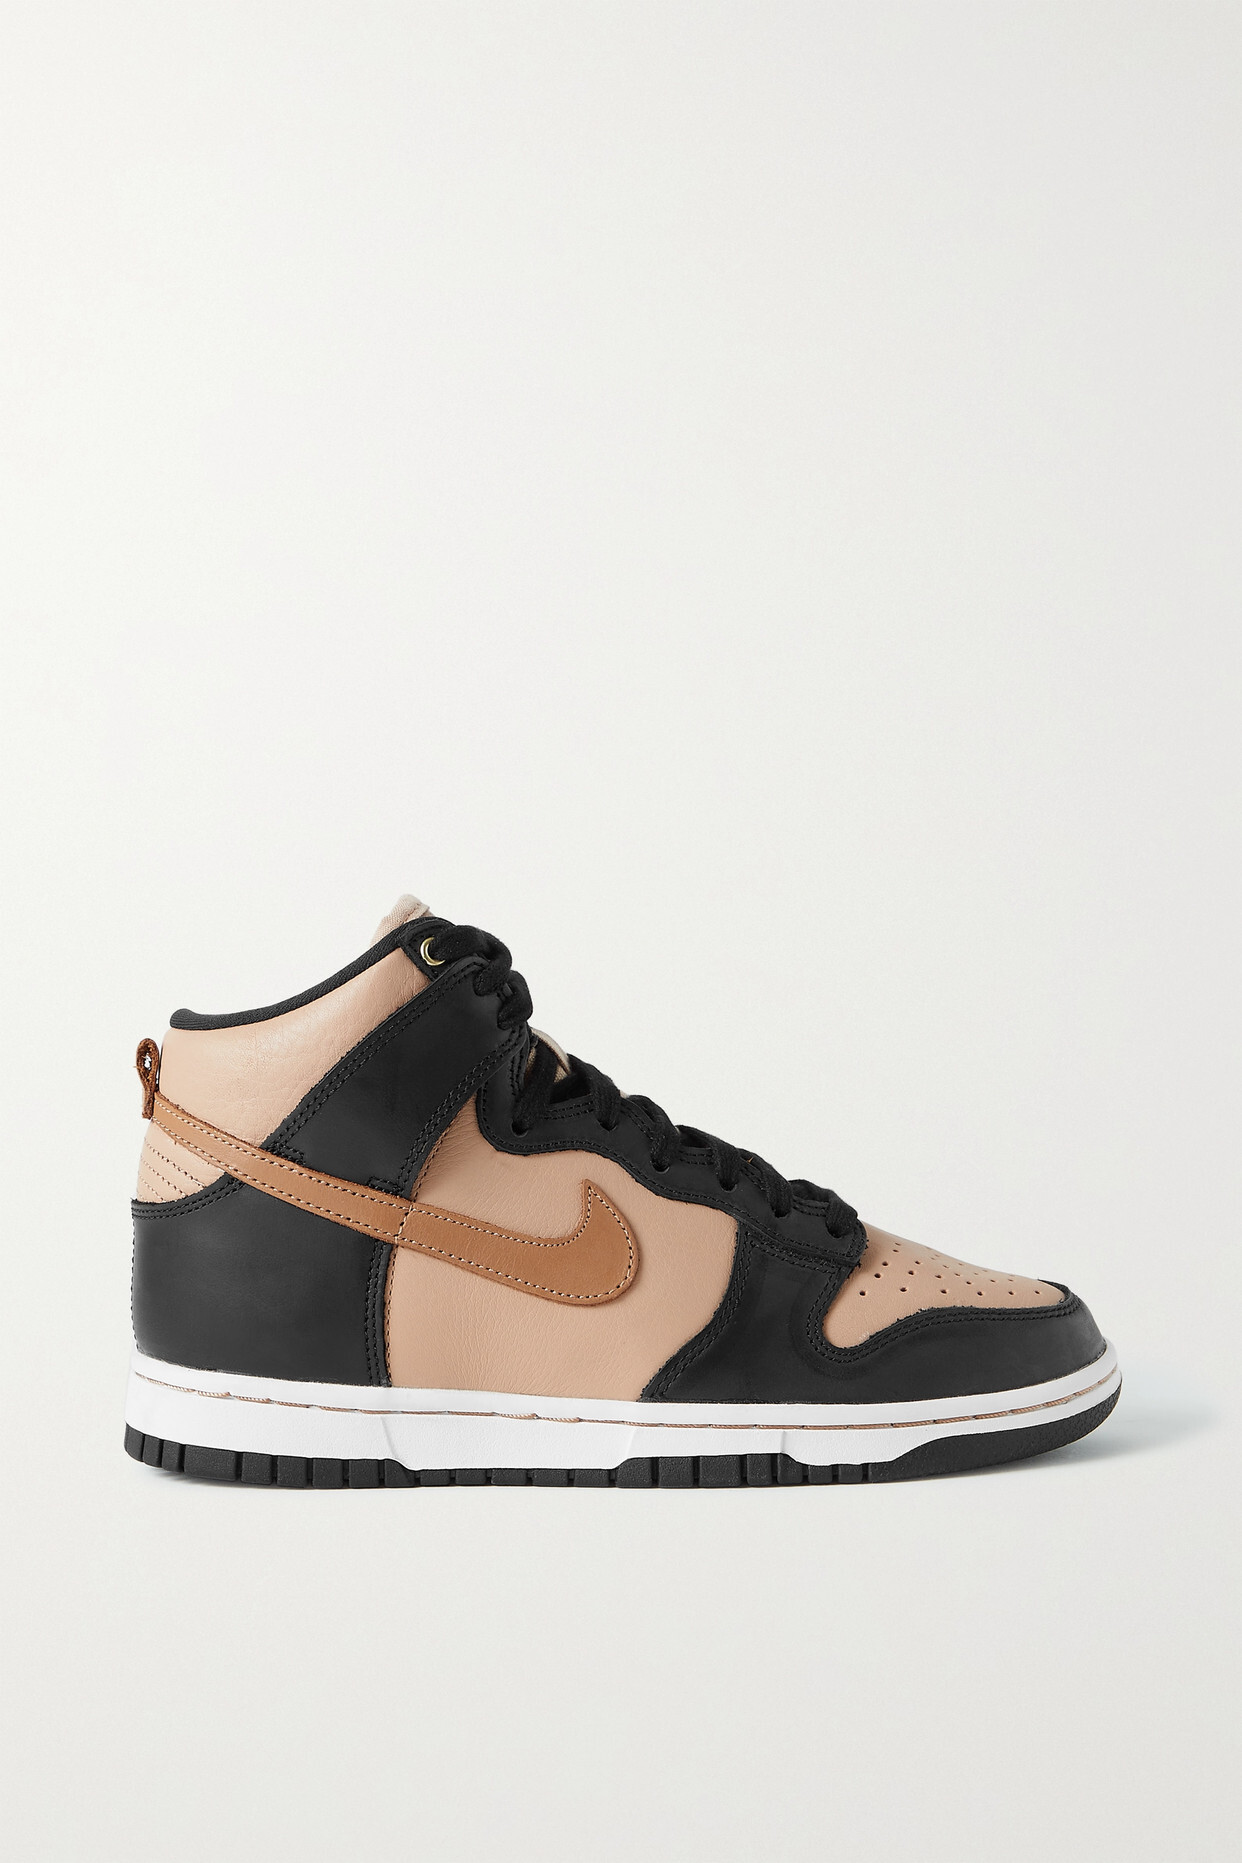 Nike - Dunk High Lxx Leather High-top Sneakers - Black